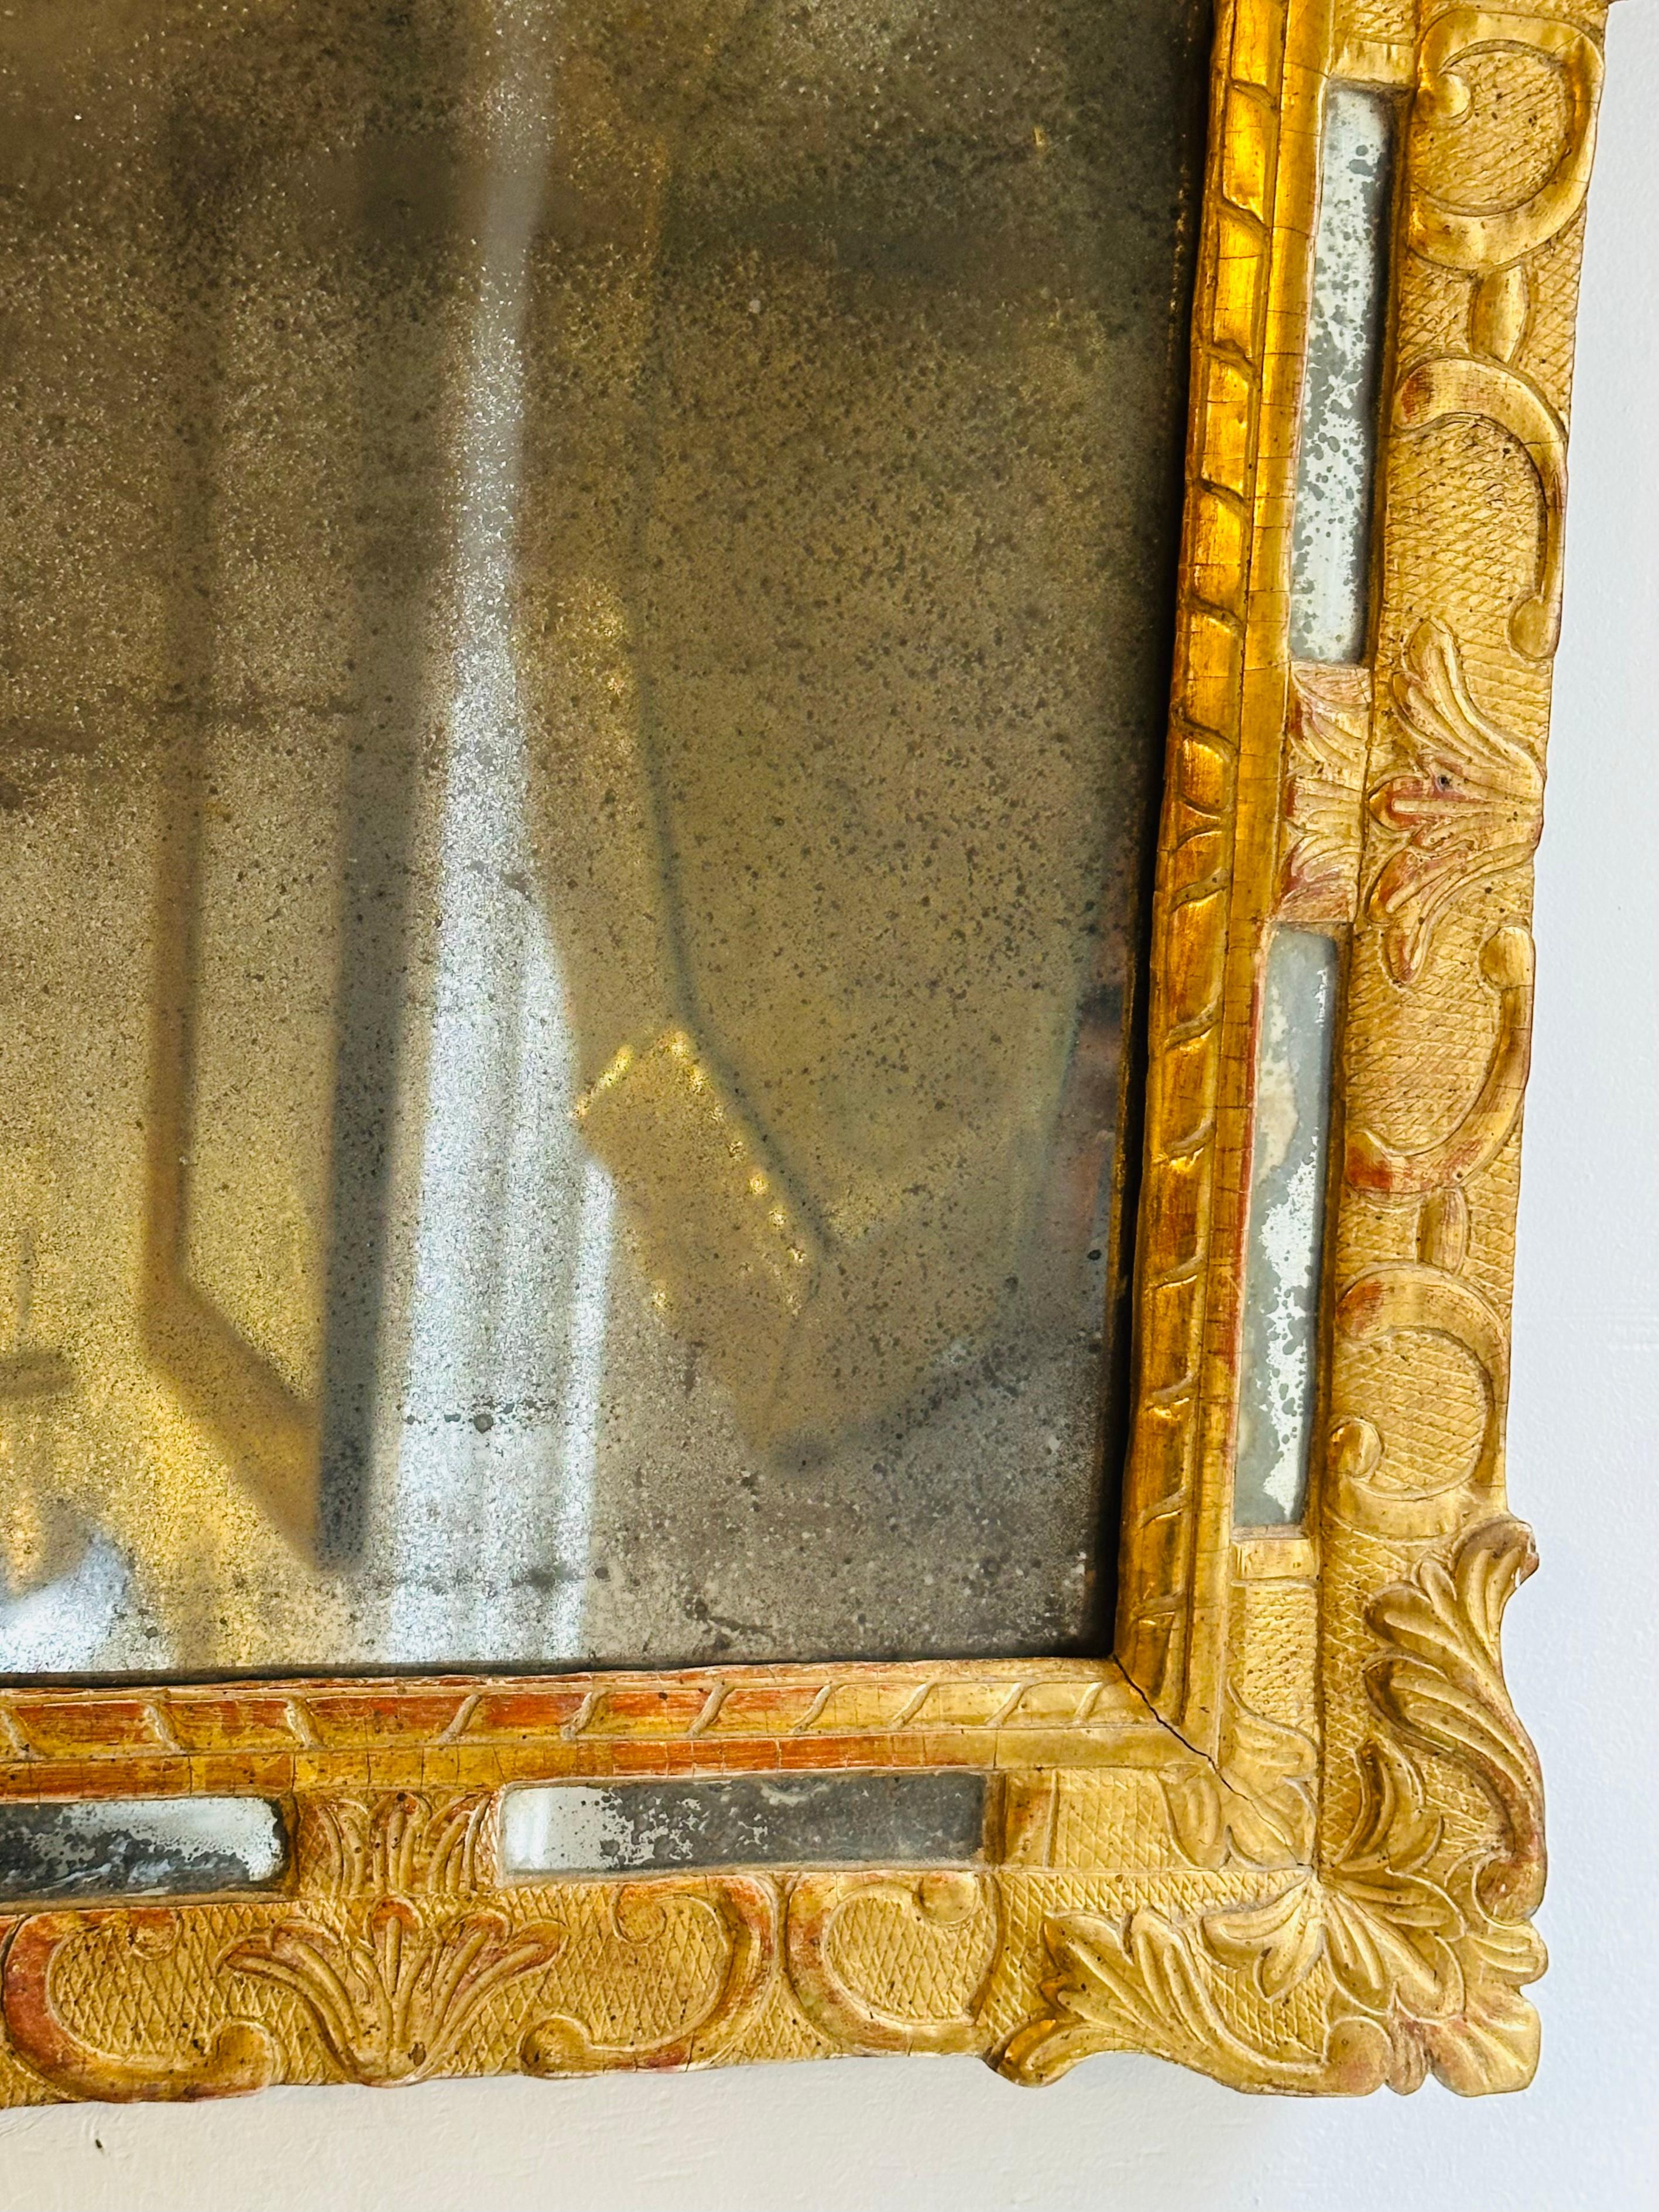 Circa 1740 French Gilt Gilded Framed Wall Mirror with Original Glass  5